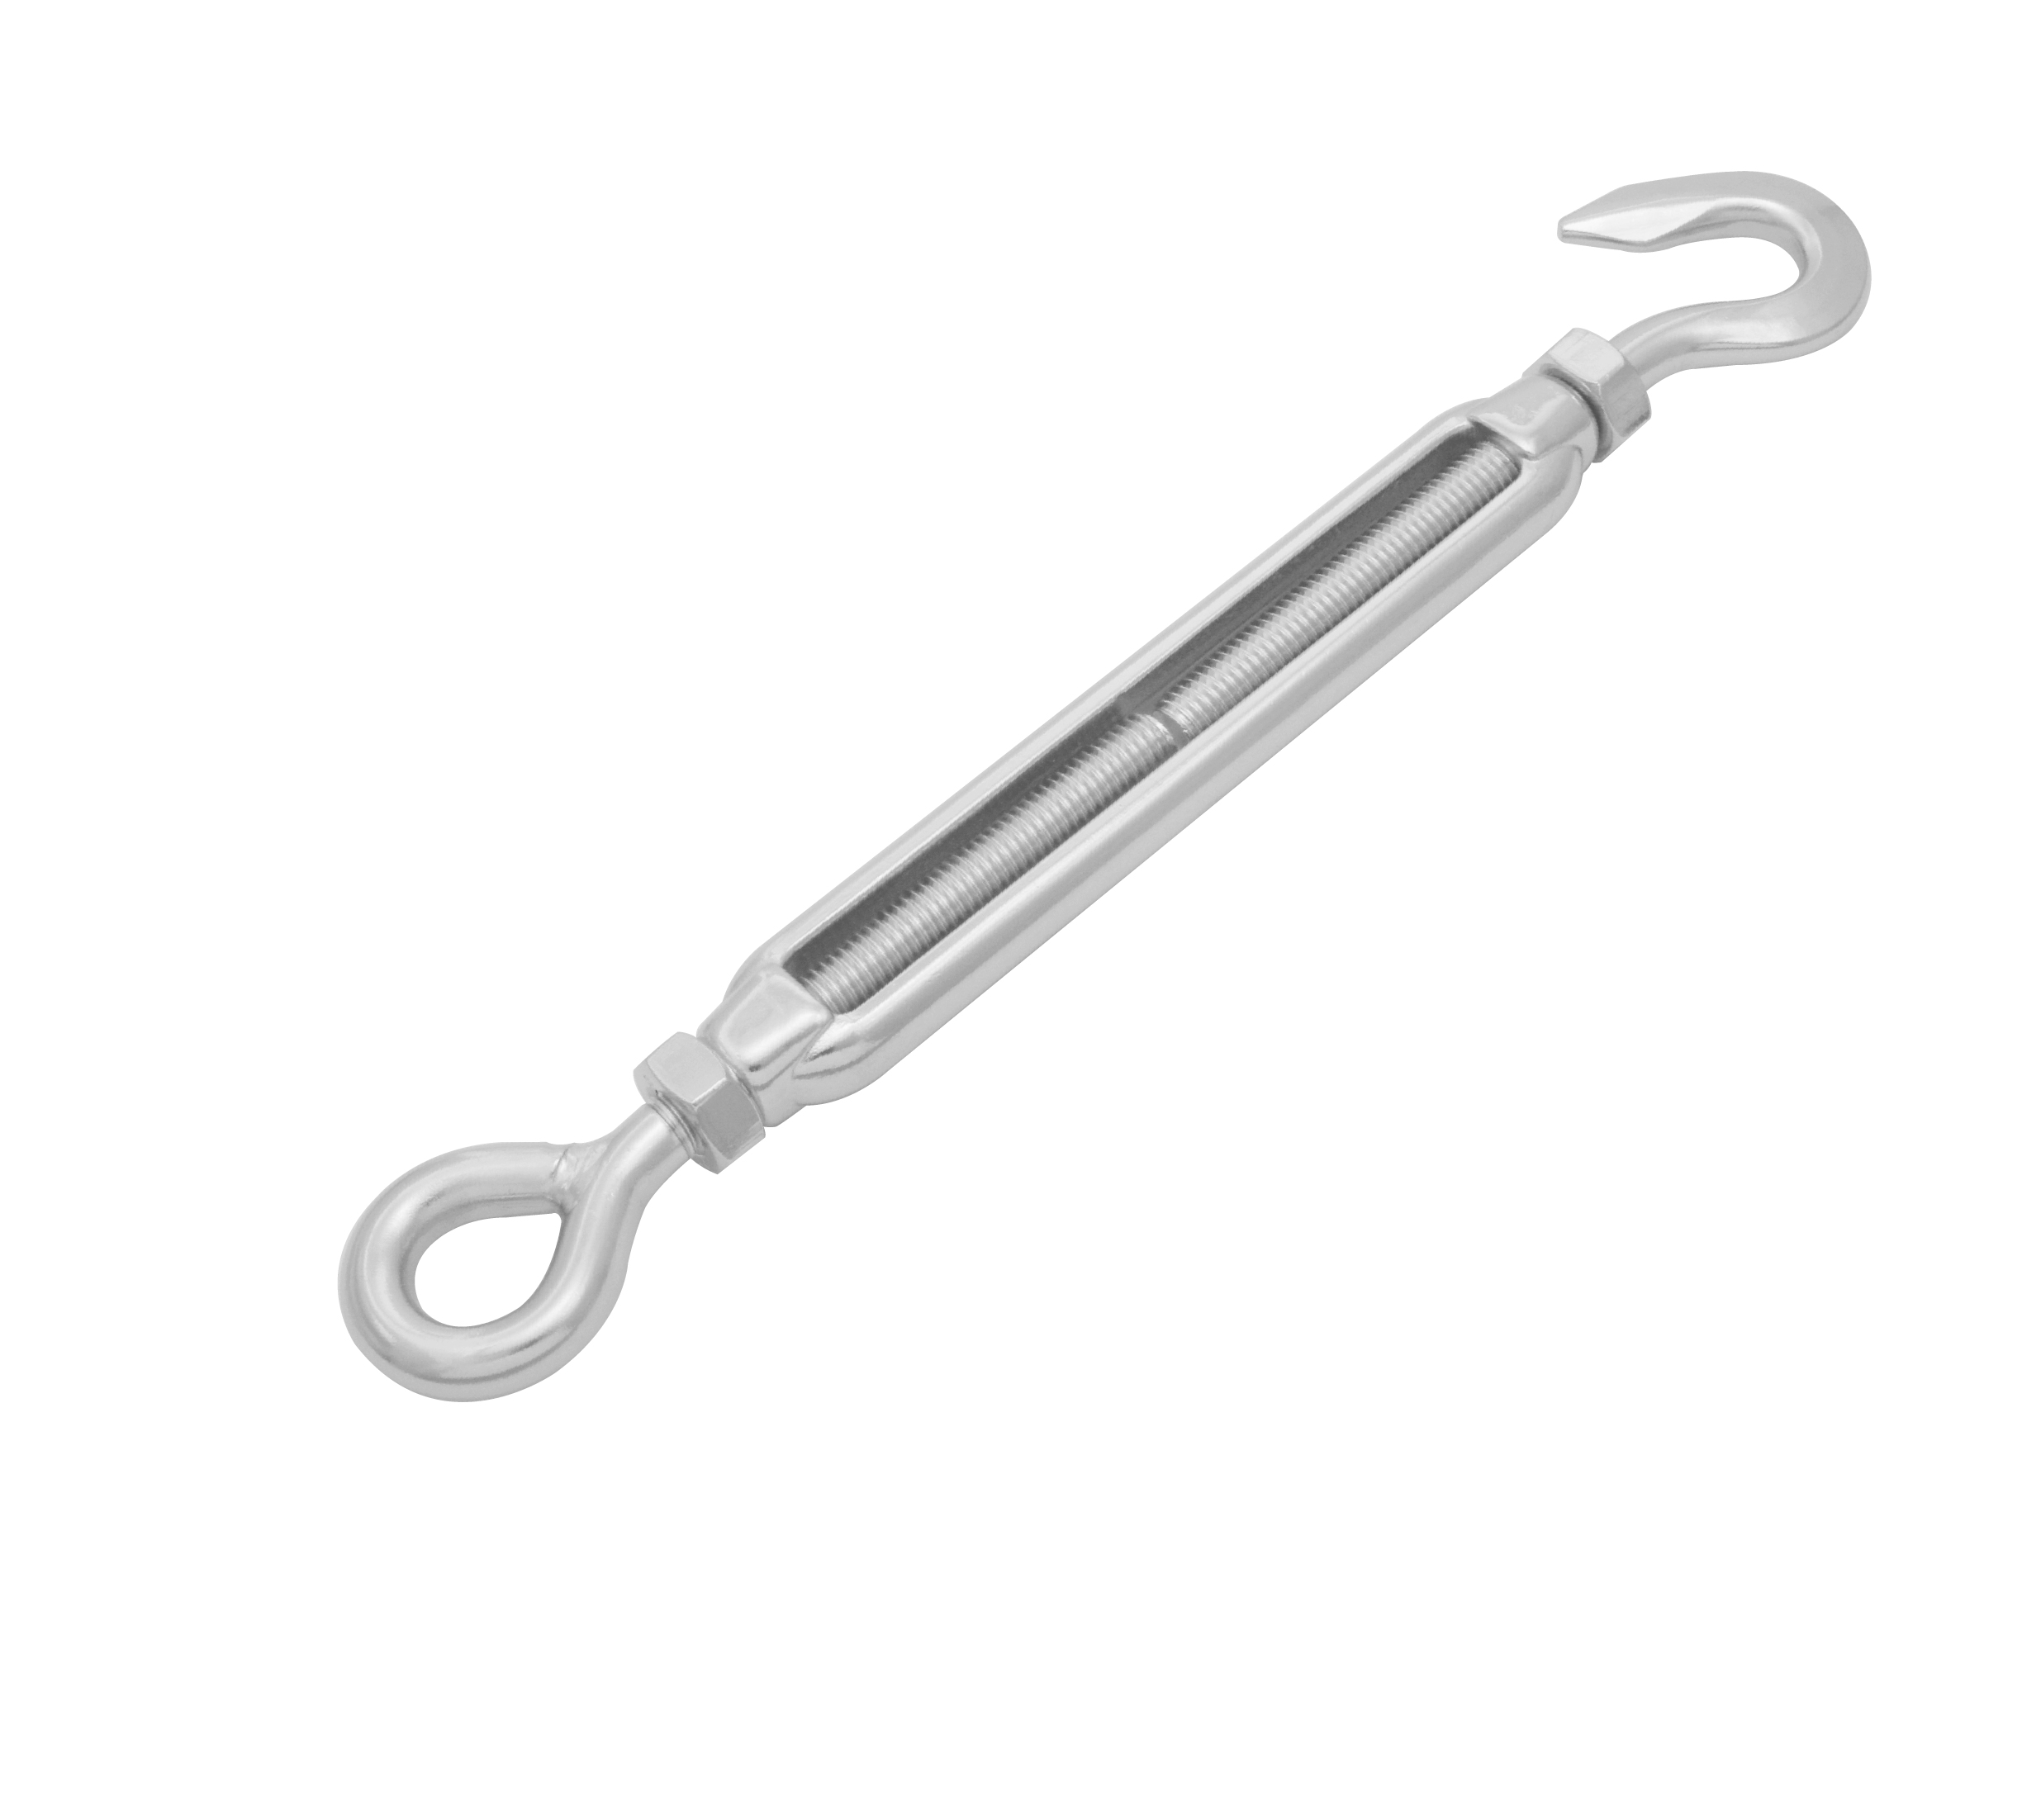 Frame turnbuckle with nut, hook and eye